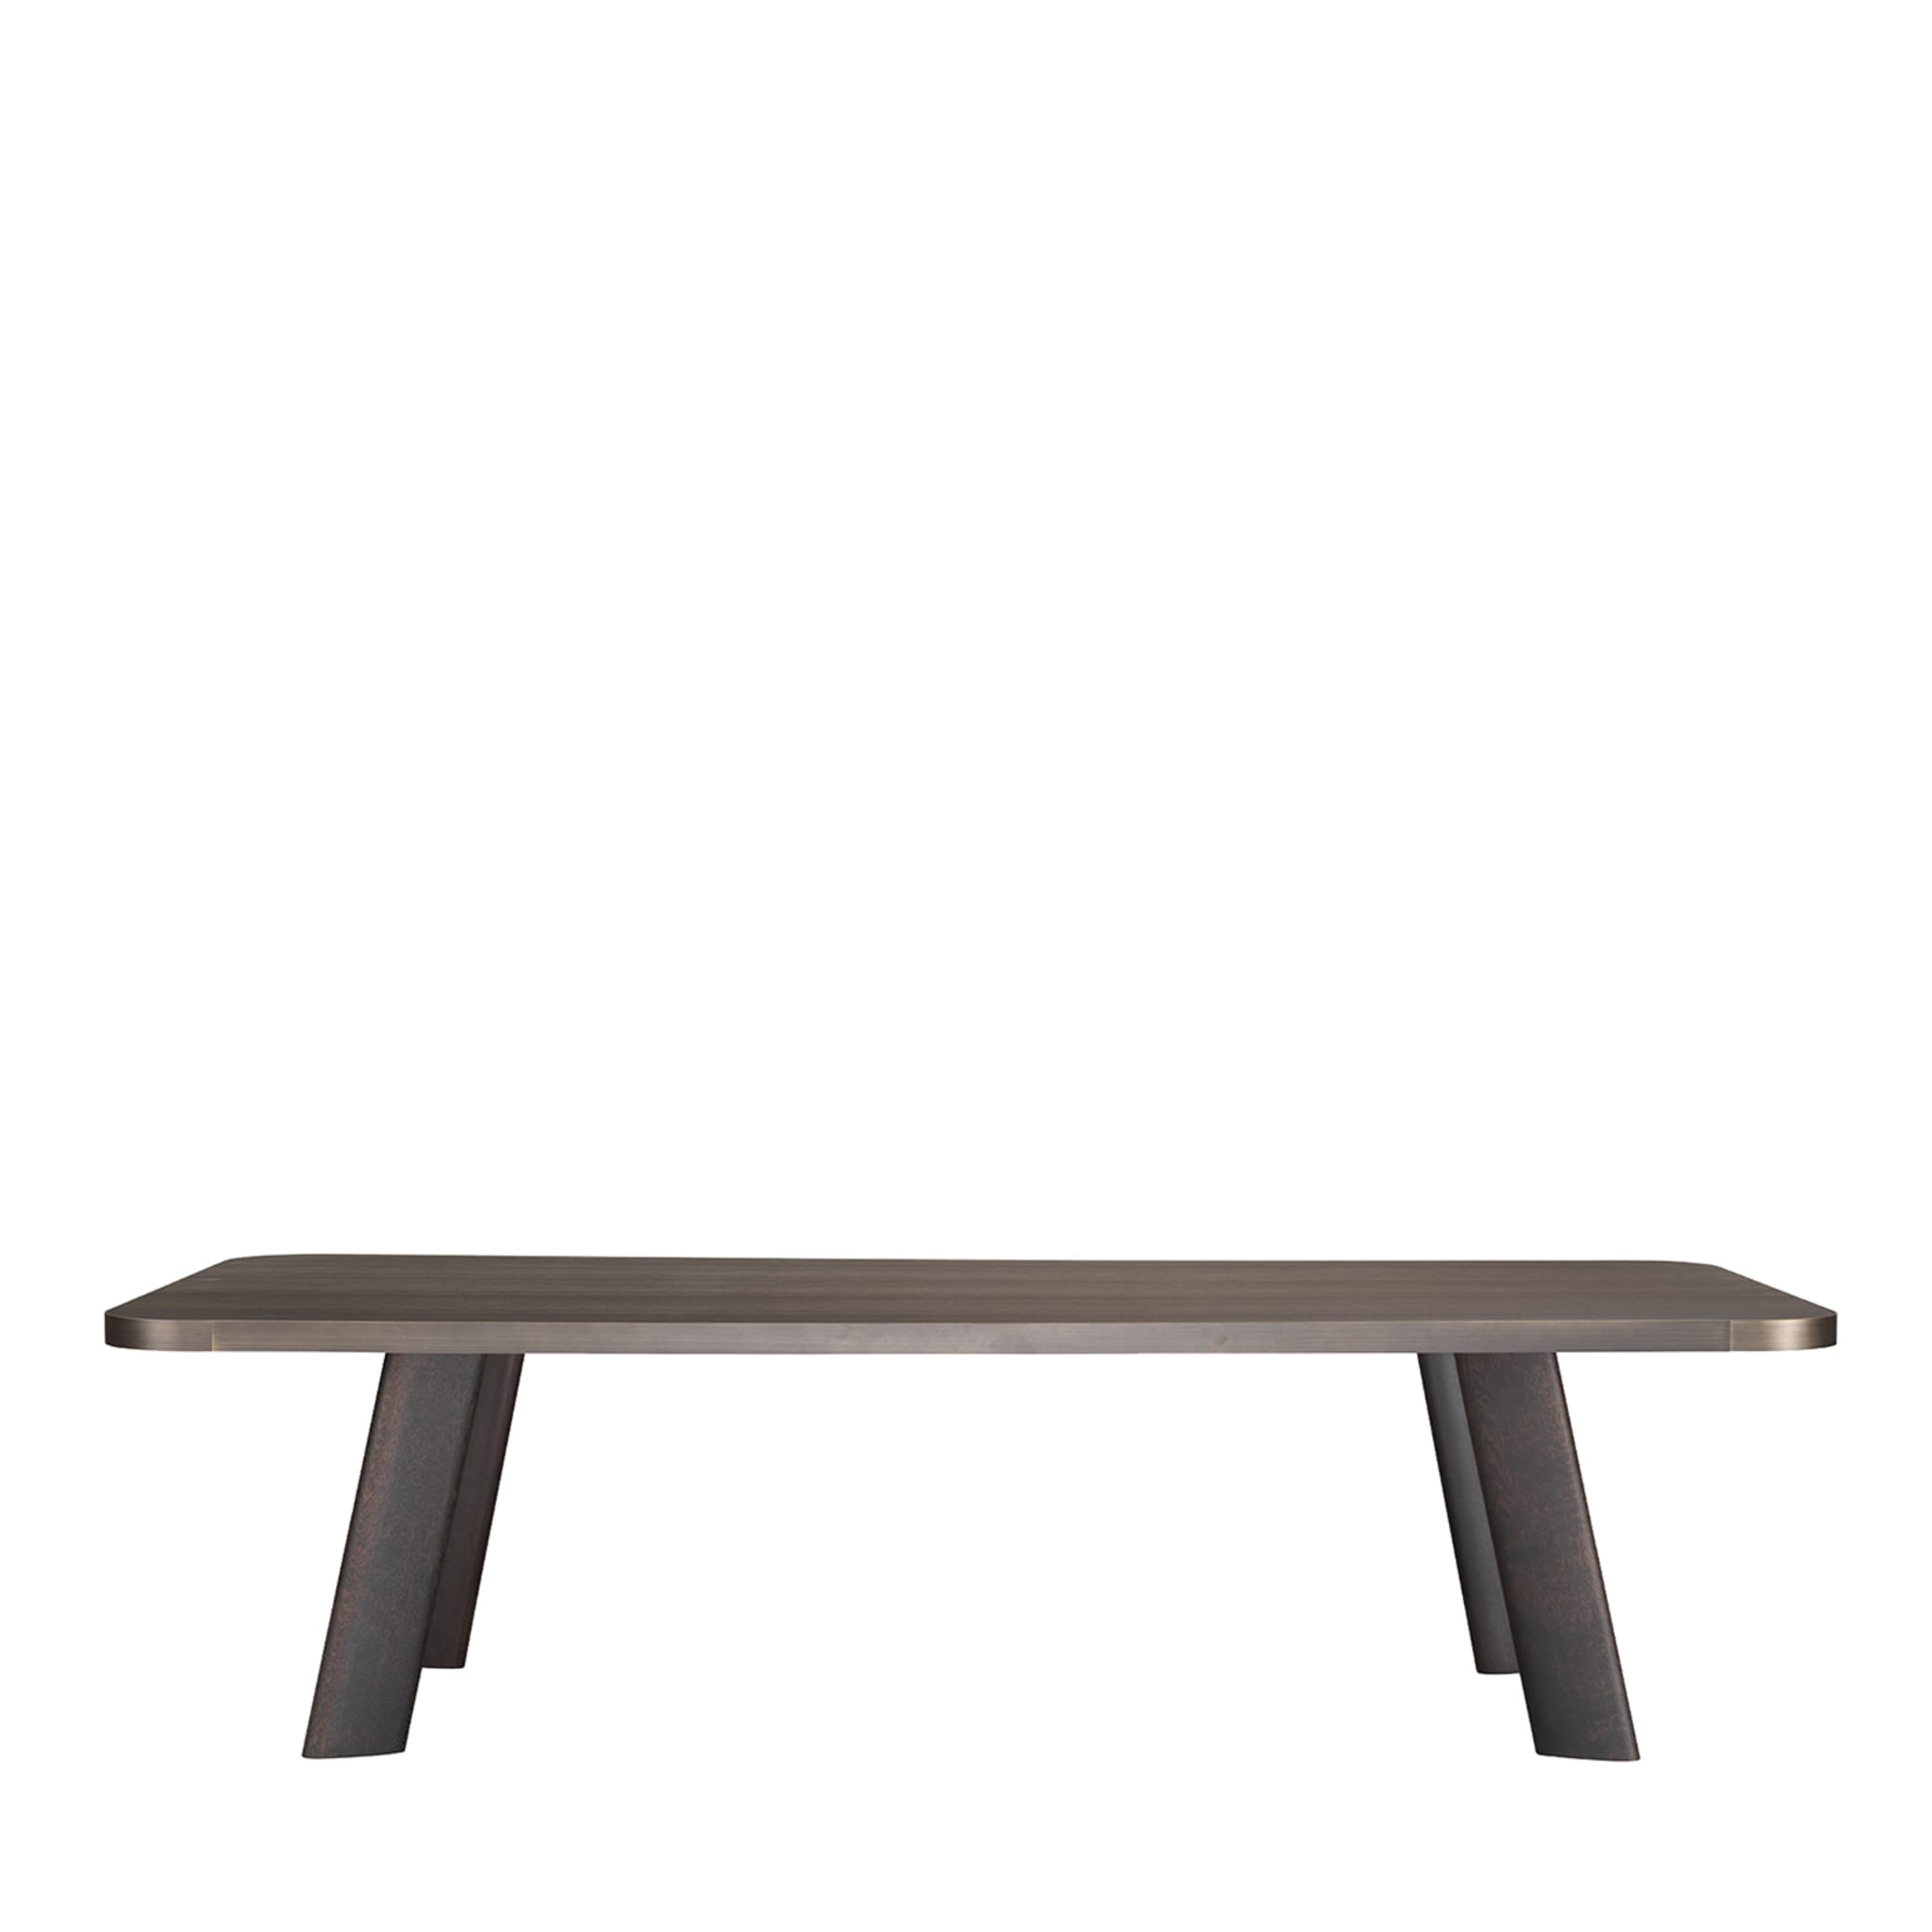 Native Dark Rectangular Dining Table by Stefano Giovannoni - Main view